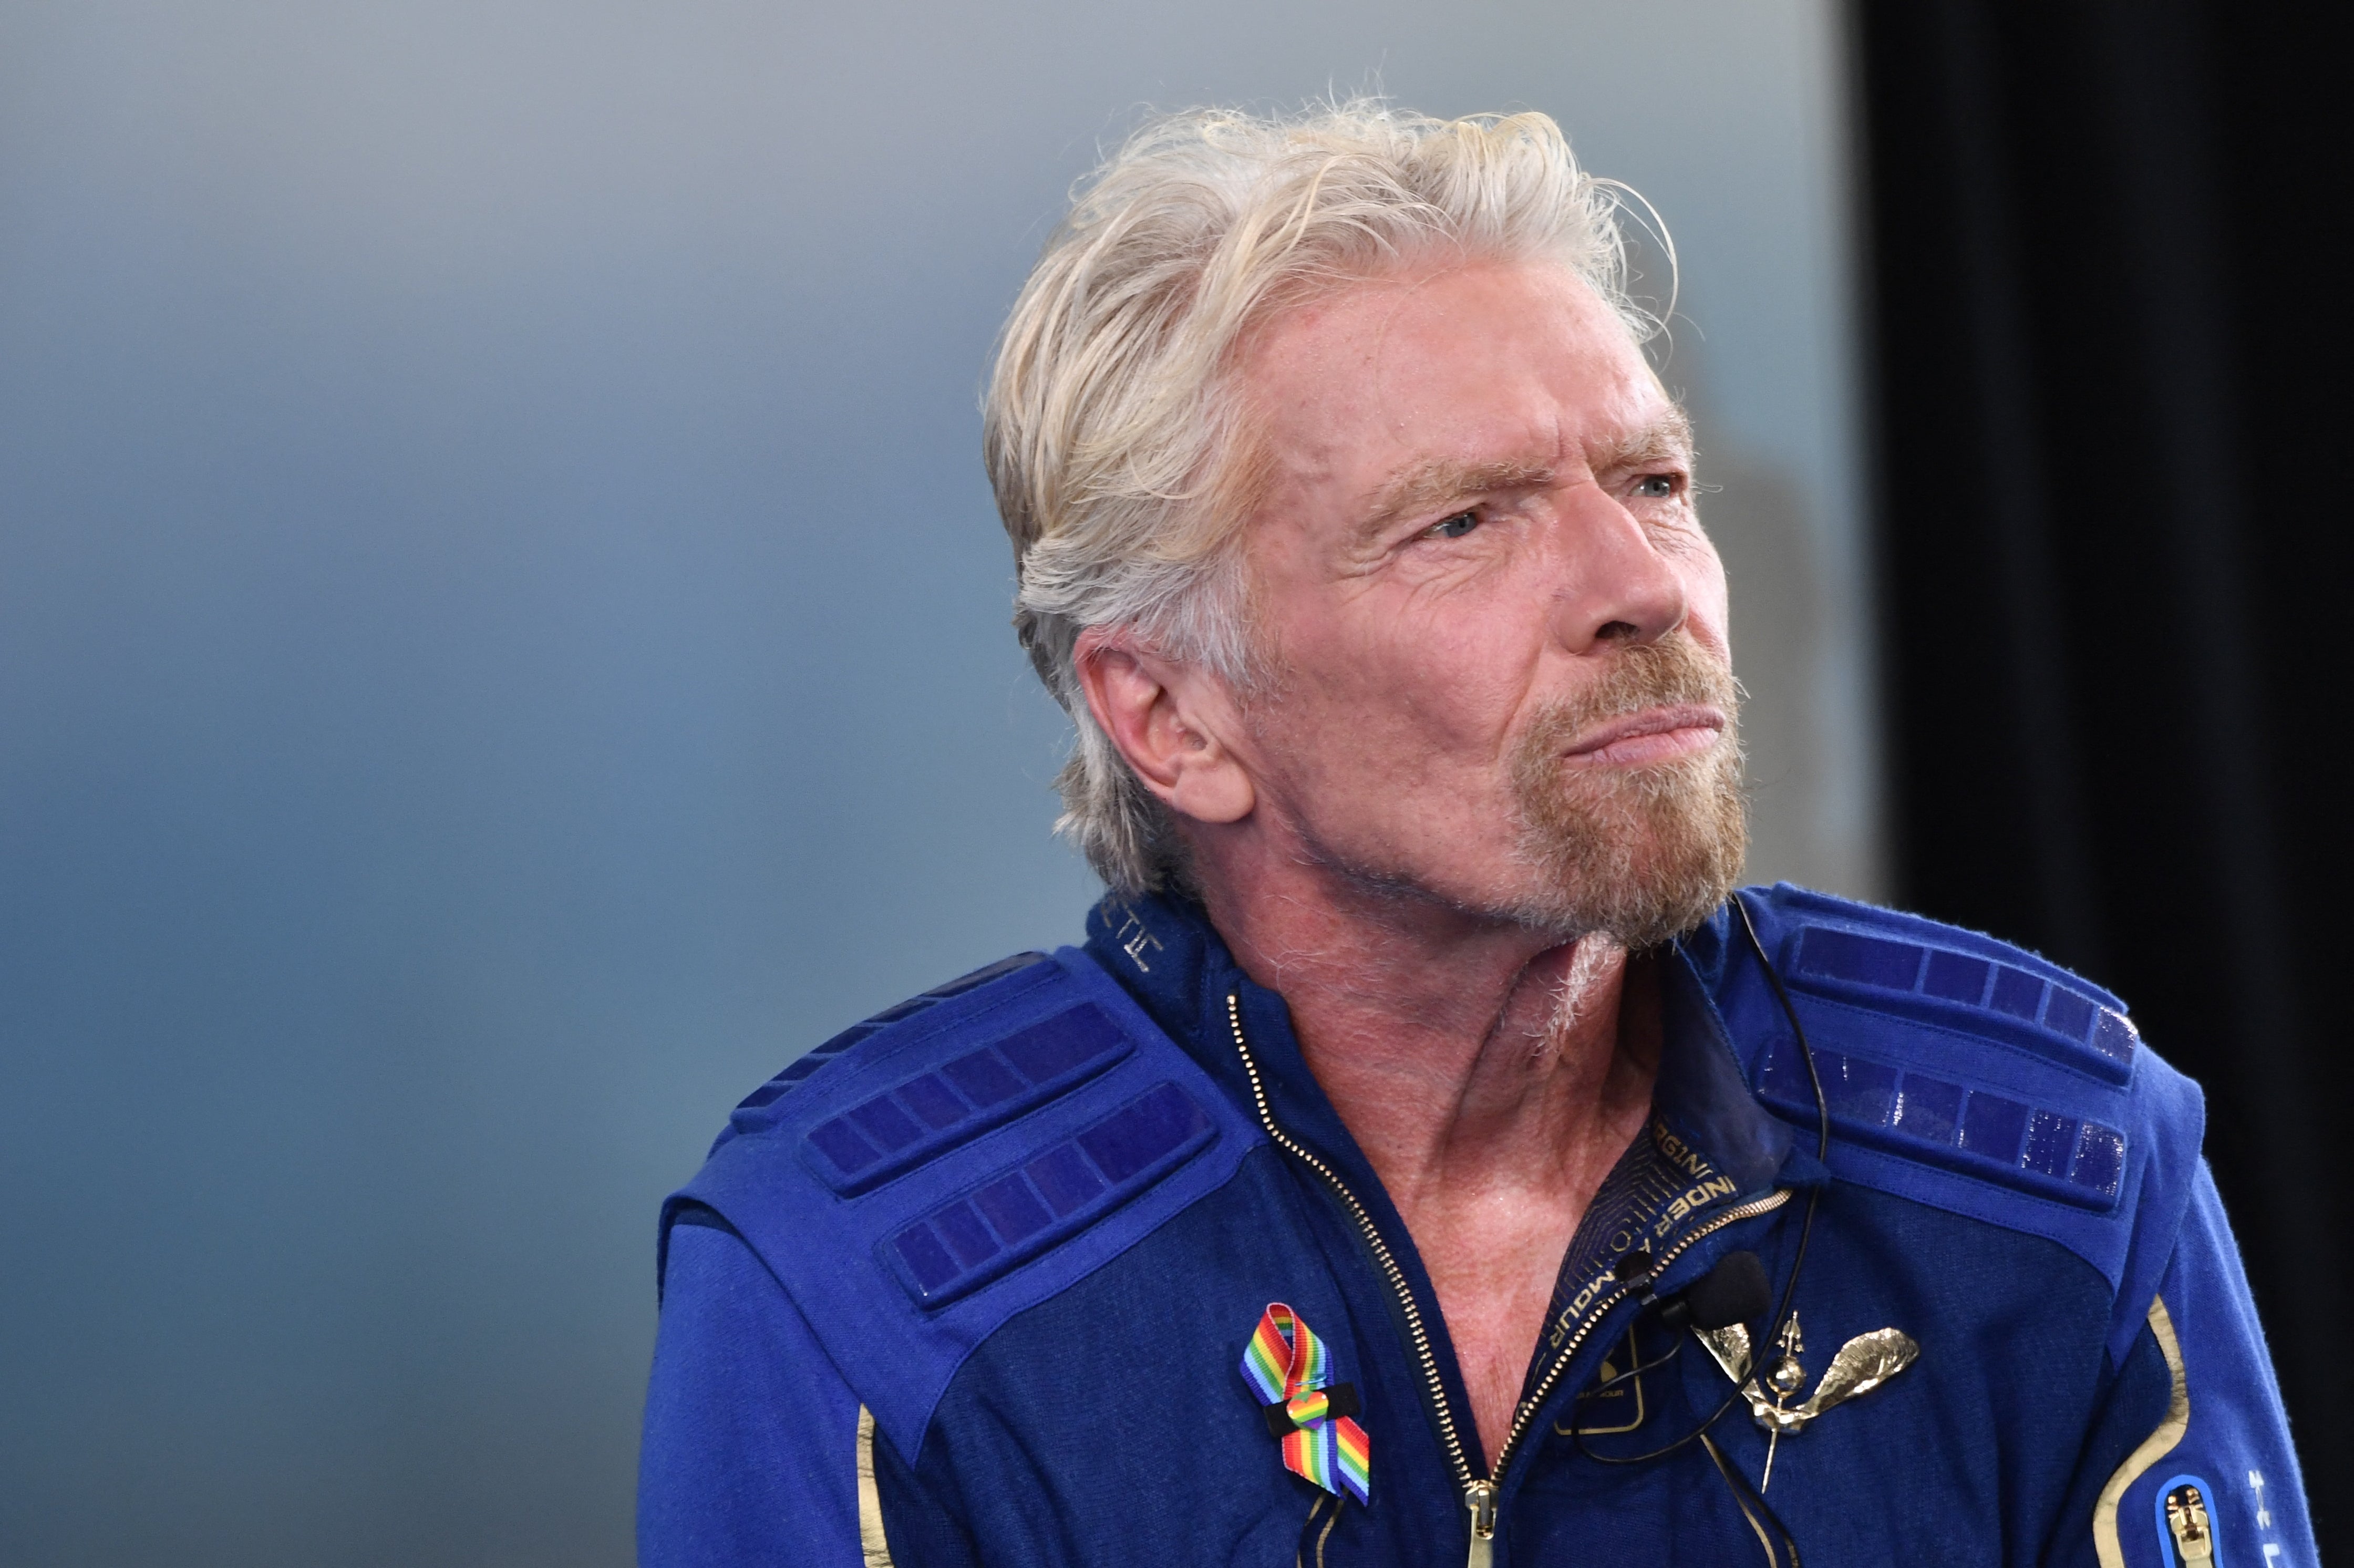 Richard Branson, pictured, is the CEO of Virgin Group, which controls more than 400 companies. His satellite company Virgin Orbit filed for bankruptcy and ceased operations last year.